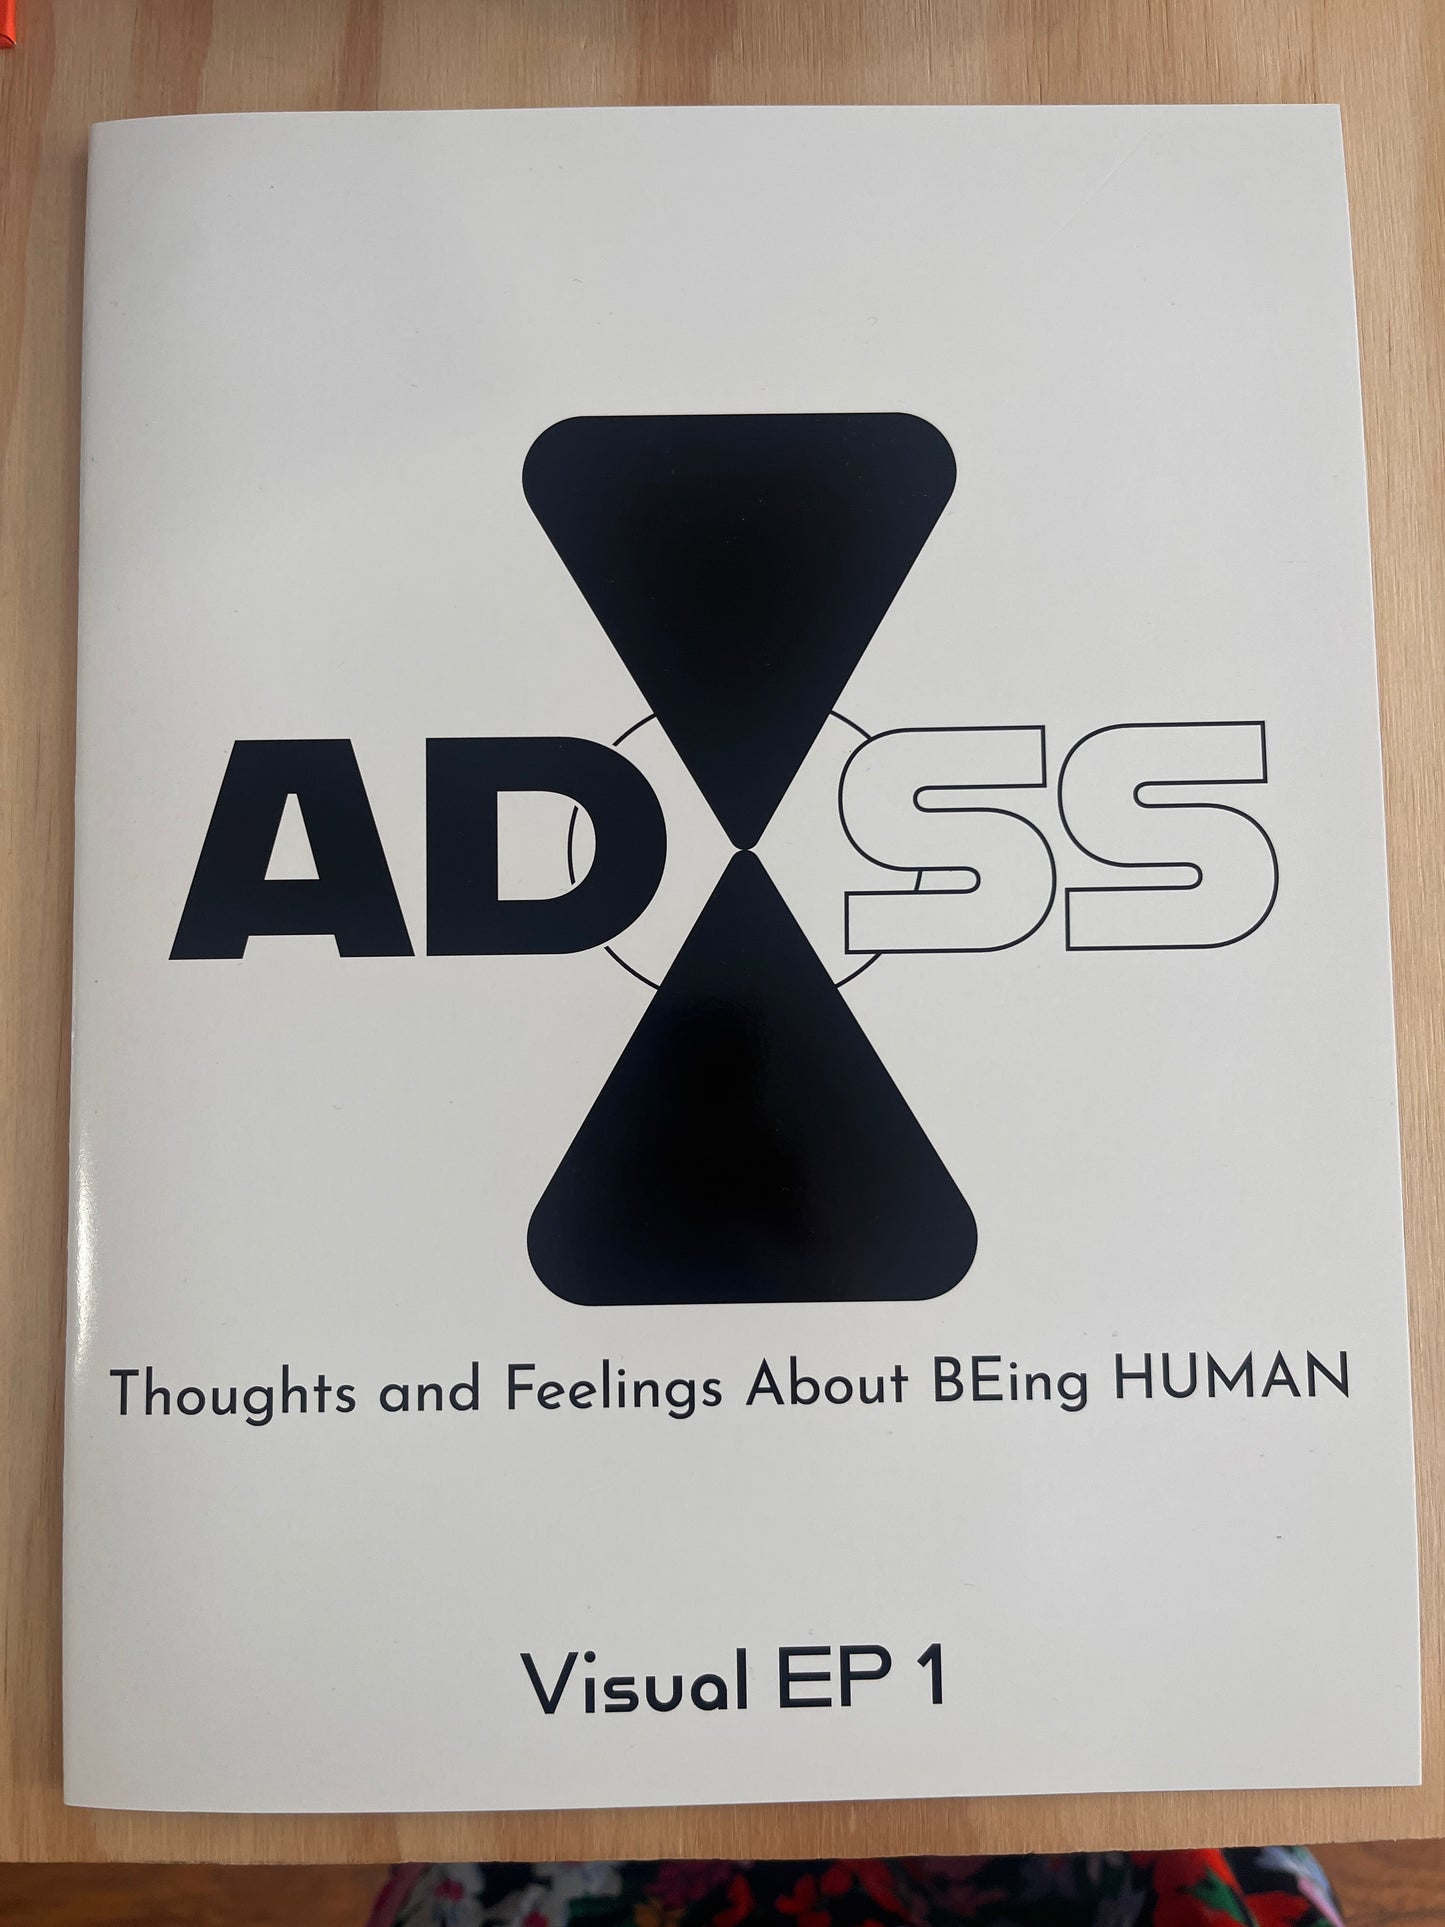 ADSS: Thoughts and Feelings about Being Human